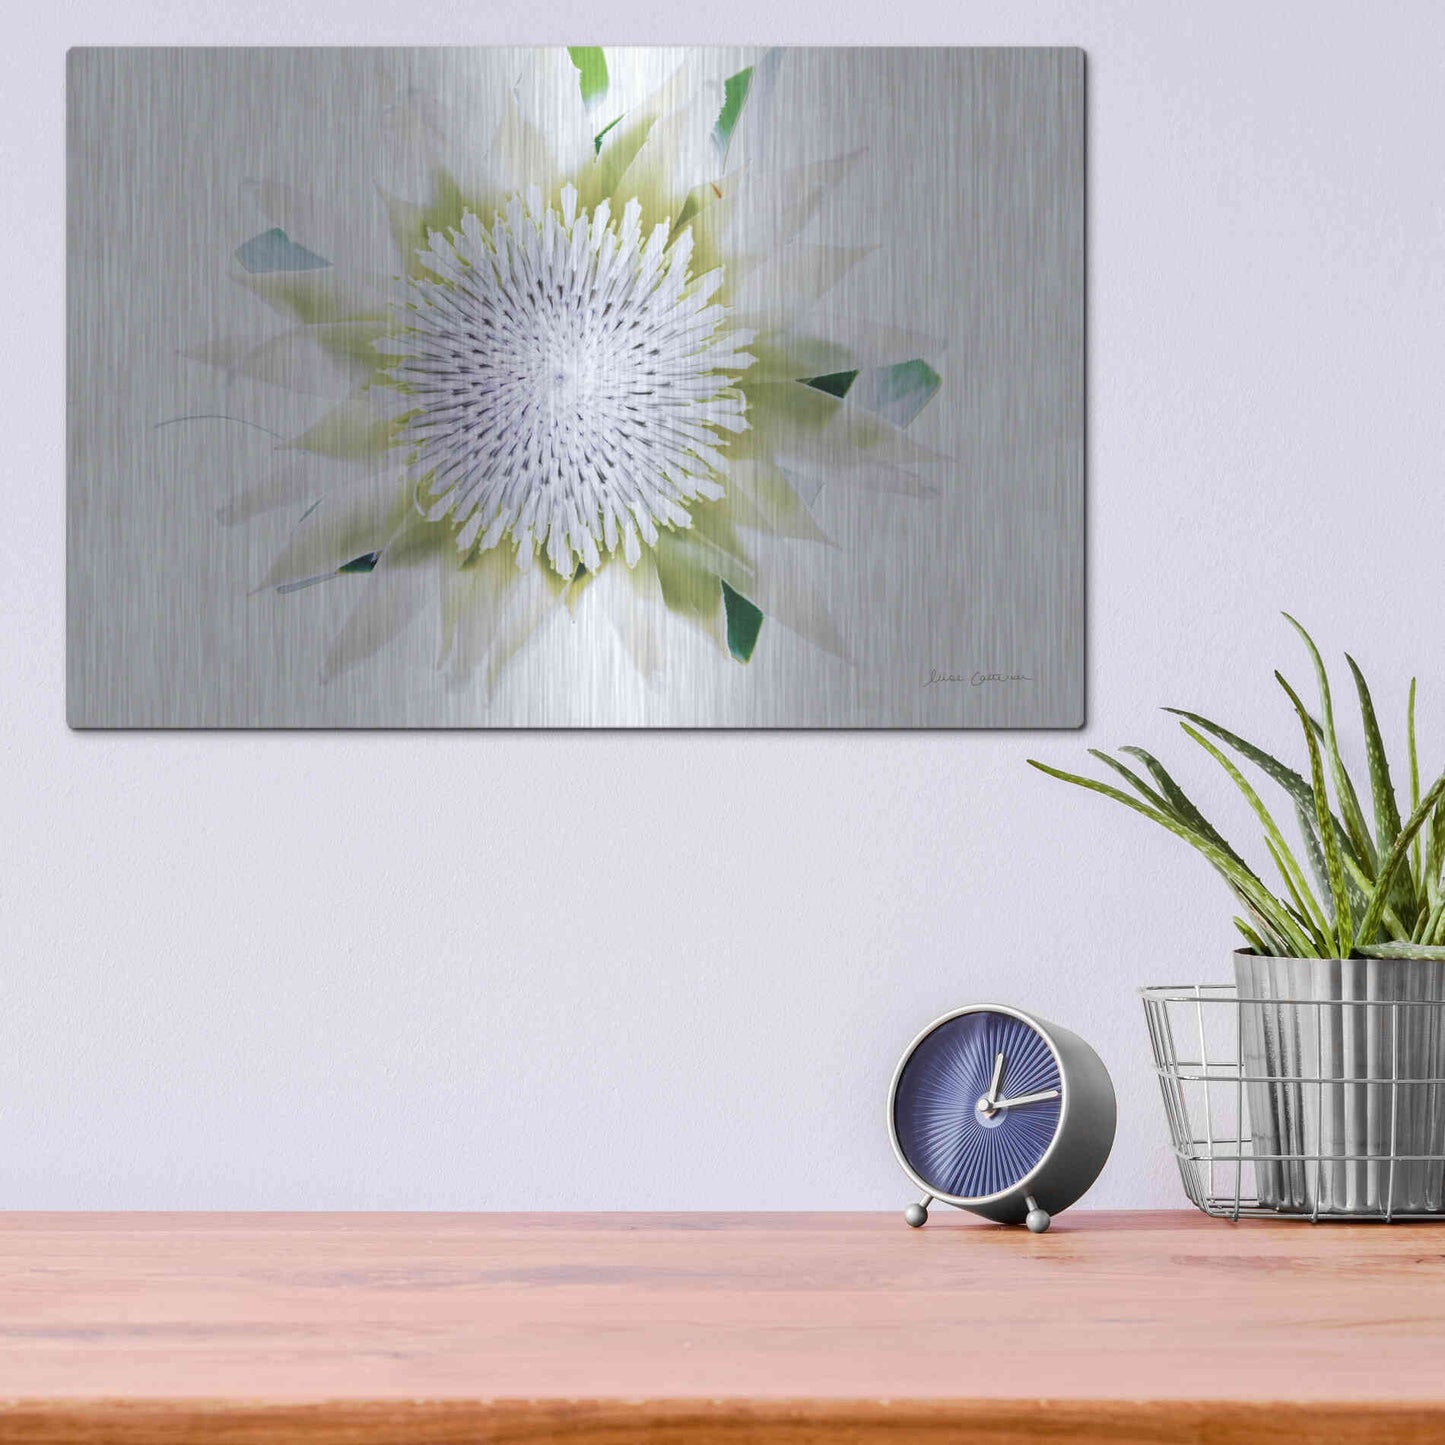 Luxe Metal Art 'Protea Center I' by Elise Catterall, Metal Wall Art,16x12